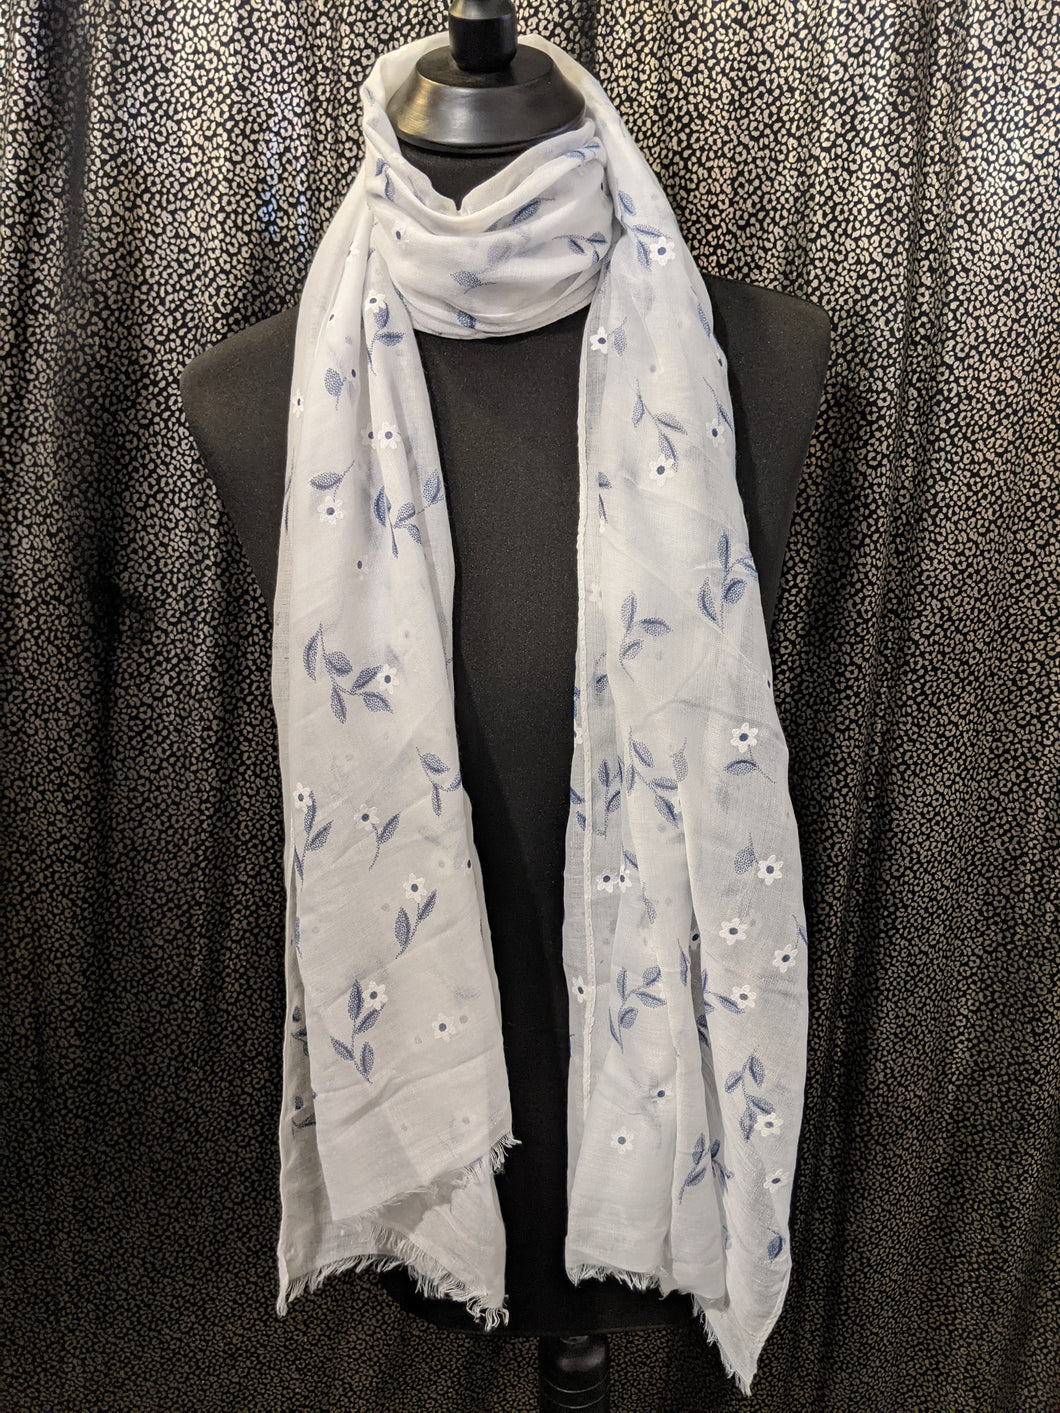 SCARF DELICATE FLORAL DESIGN - with Dotty Printed Leaves in White/Navy